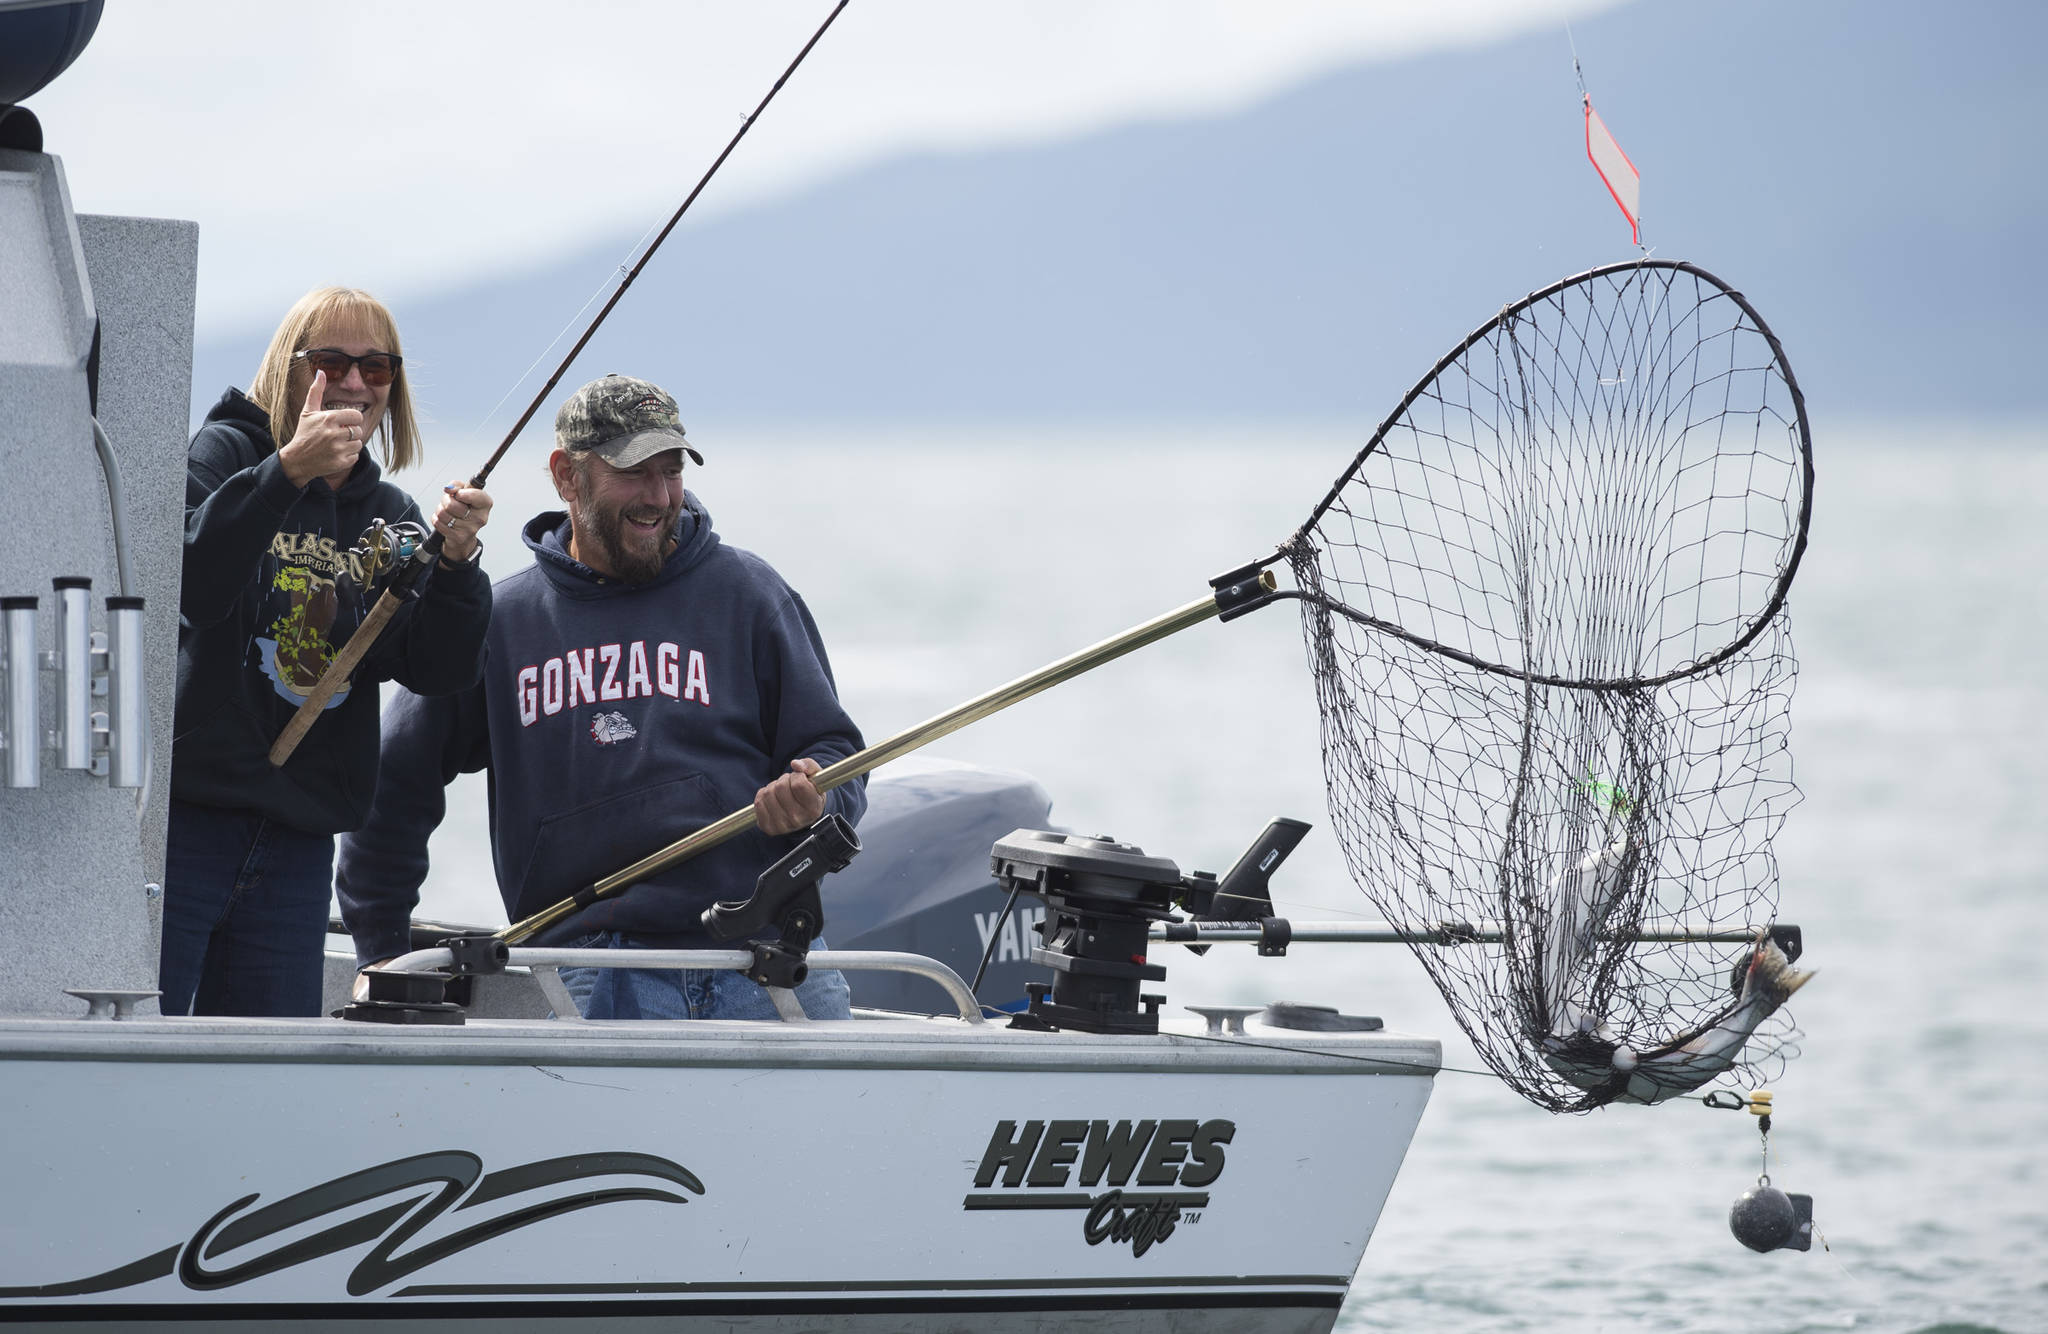 Scott and Shari Guenther pull in a catch during the 72nd Annual Golden North Salmon Derby on Friday, August 17, 2018, sponsored by the Territorial Sportsmen. (Michael Penn | Juneau Empire)